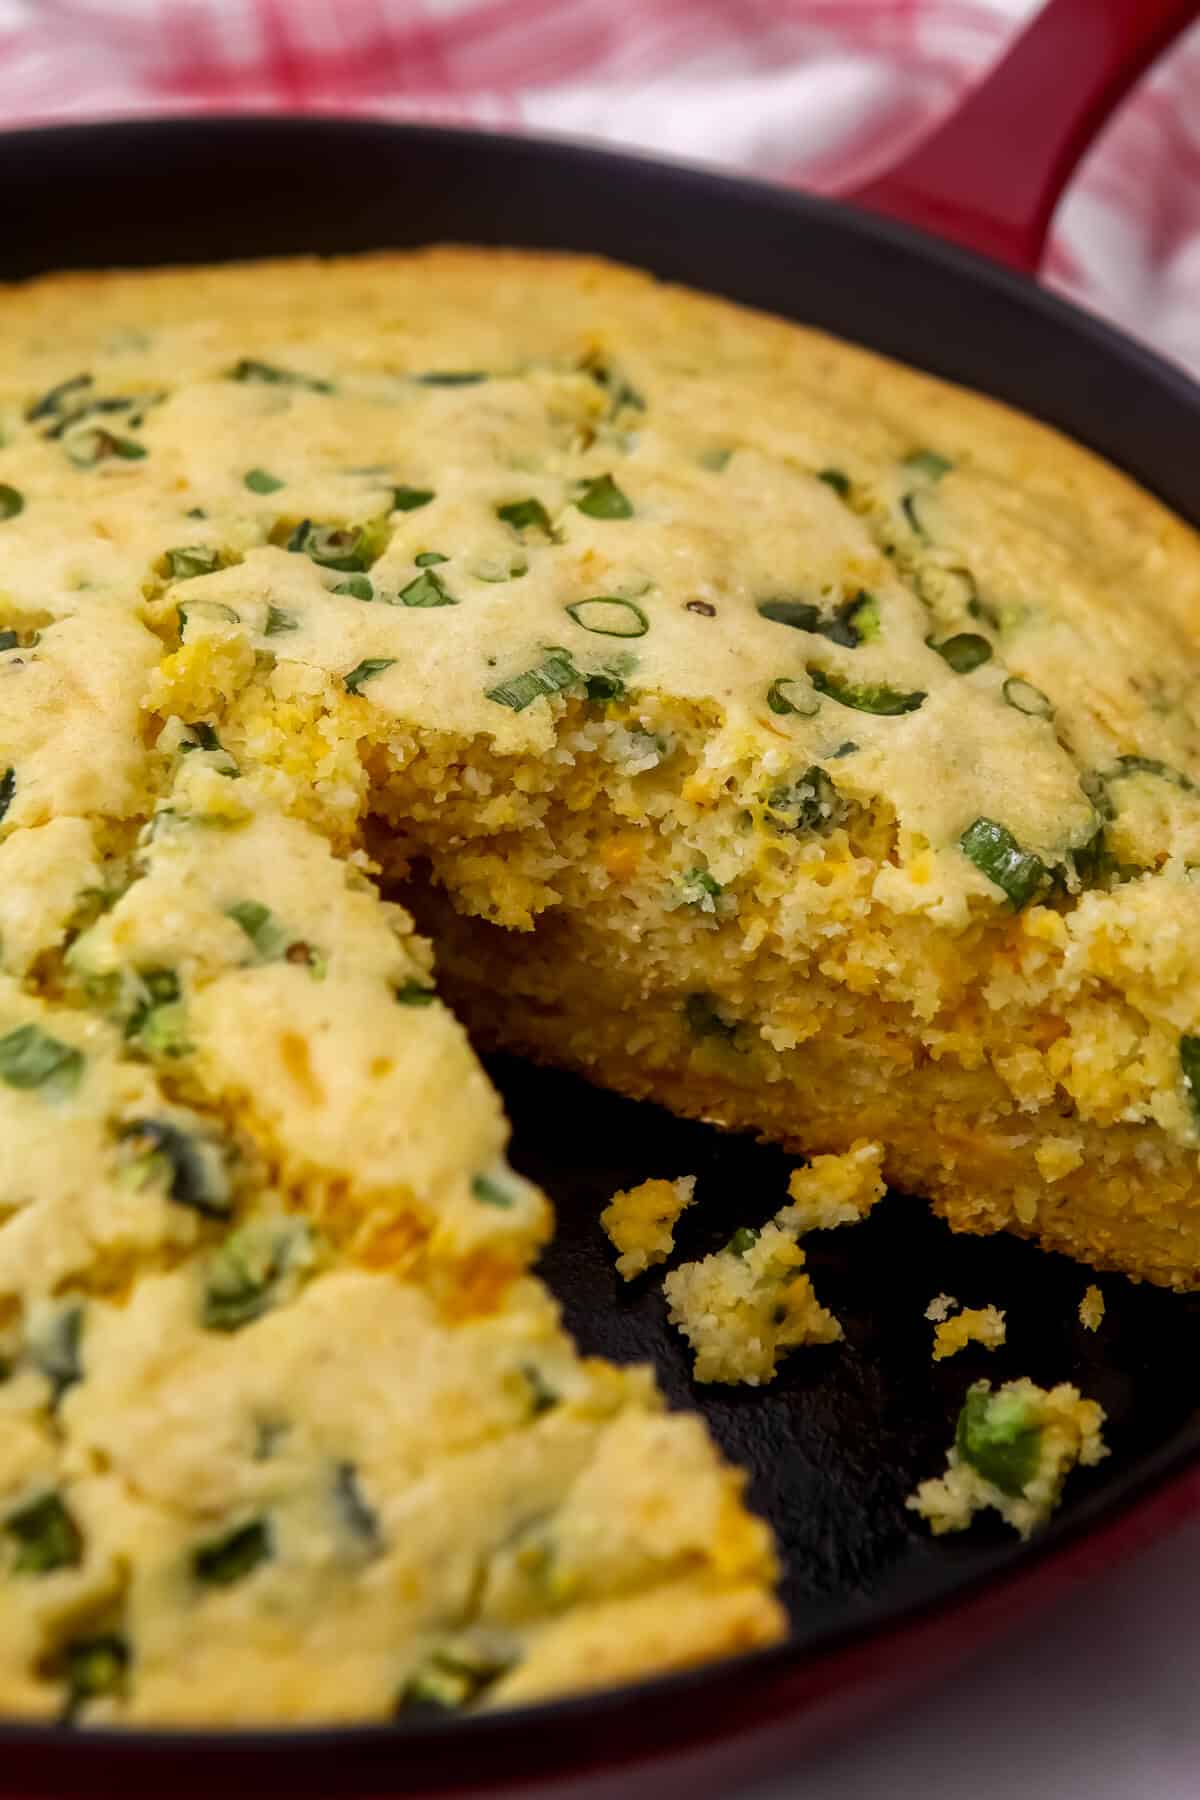 A close up of vegan jalapeno cornbread with a slice taken out of it.